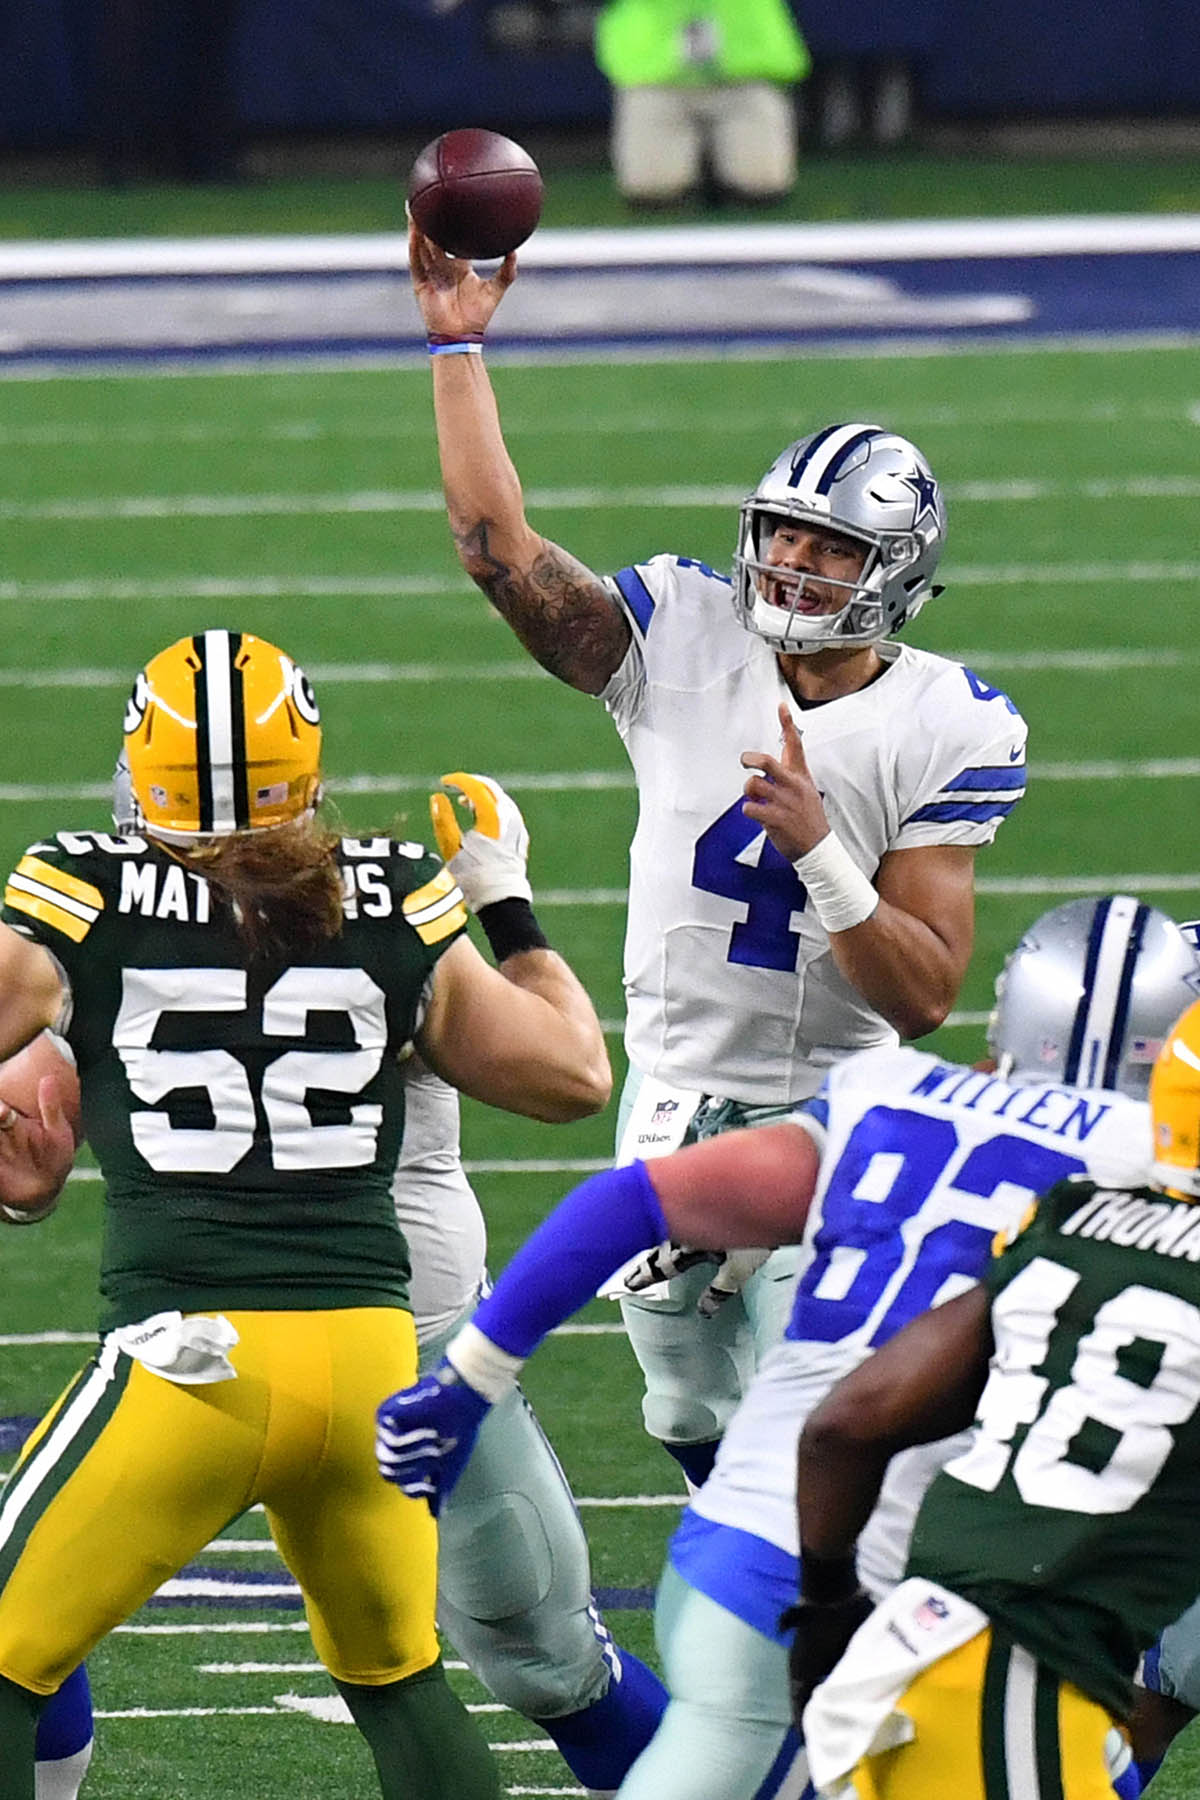 Dallas Cowboys quarteback, DAK PRESCOTT, completes a pass to wide receiver Cole Beasley at the end of the first half of the NFC Championship game at A&T Stadium.  Prescott completed 24 of 38 passes for 302 yards and 3 touchdowns and 1 interception in a 34-31 losing effort.